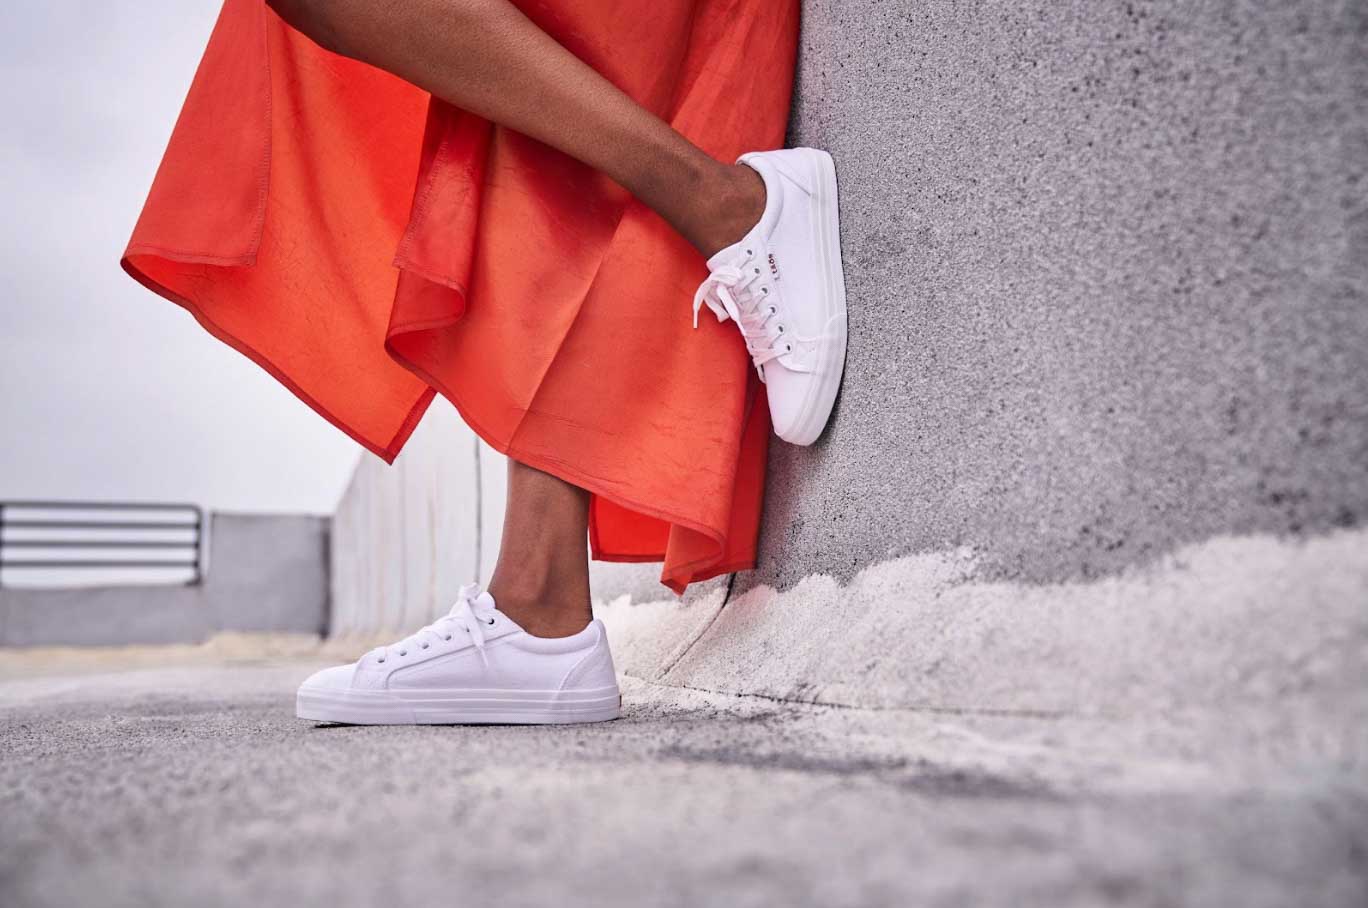 Sneakers in a neutral color, such as these Taos Footwear Plim Soul Sneakers, are ideal everyday walking shoes to pack for a Europe trip